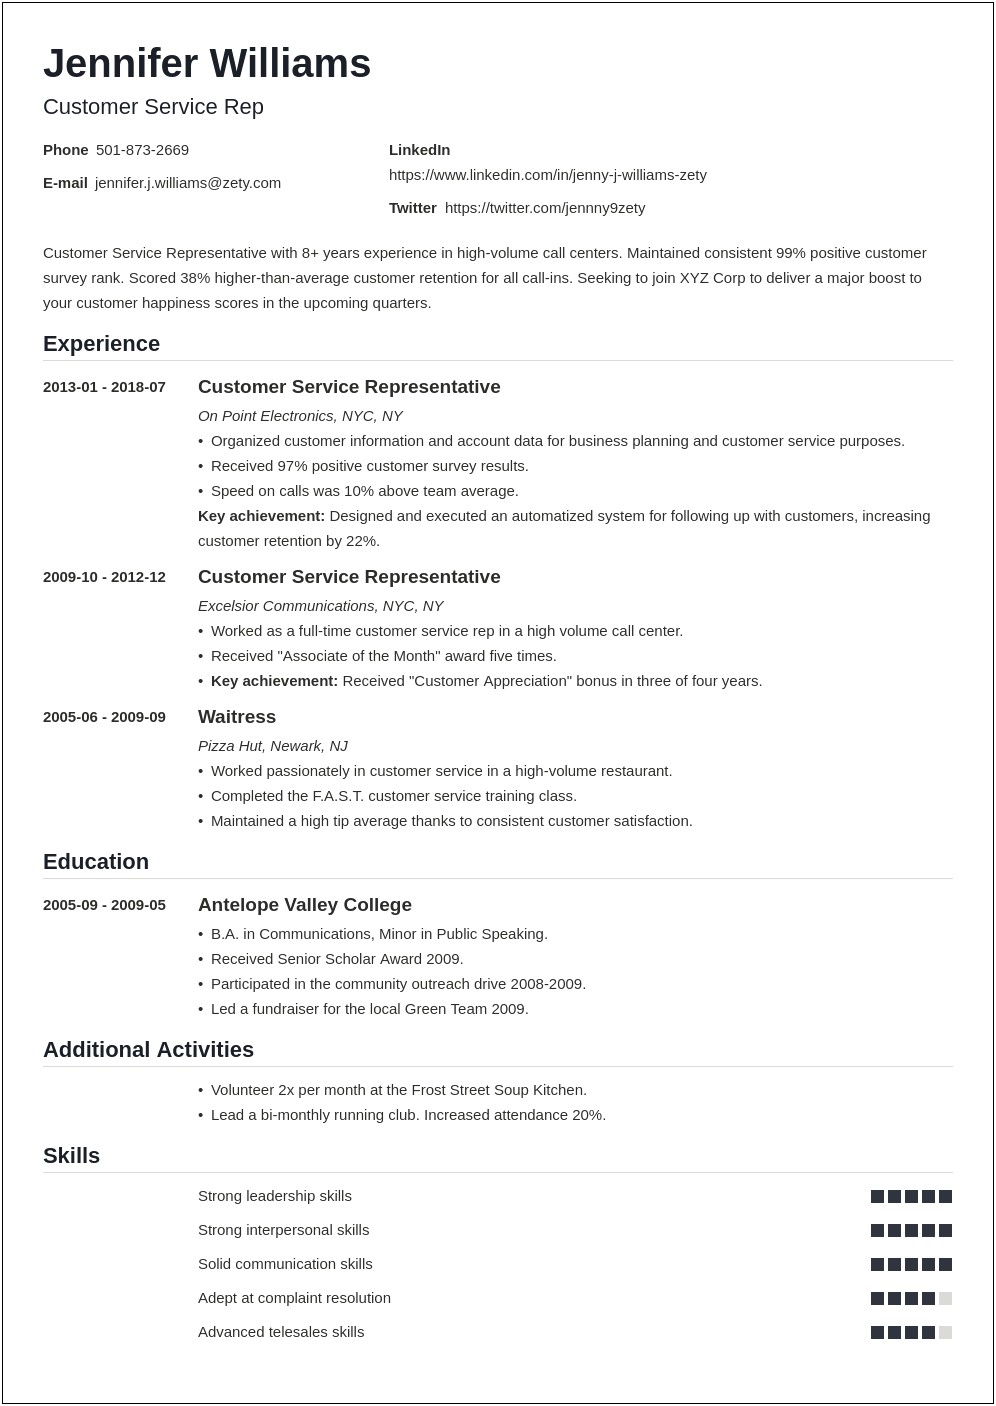 Listing All Jobs On A Resume